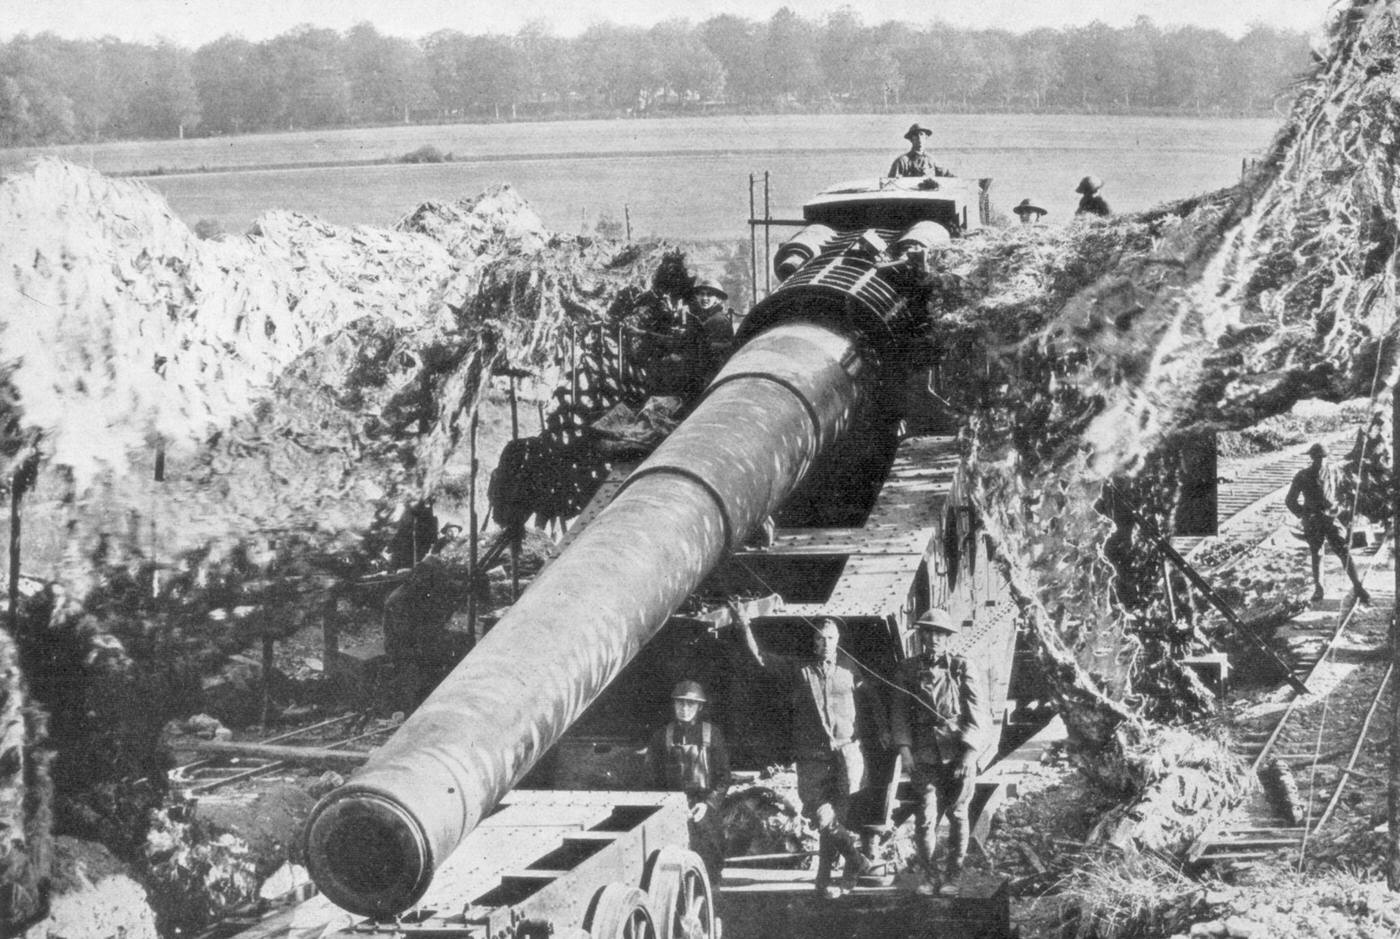 American 14-inch railway gun used during the Meuse-Argonne Offensive in France, 1918.